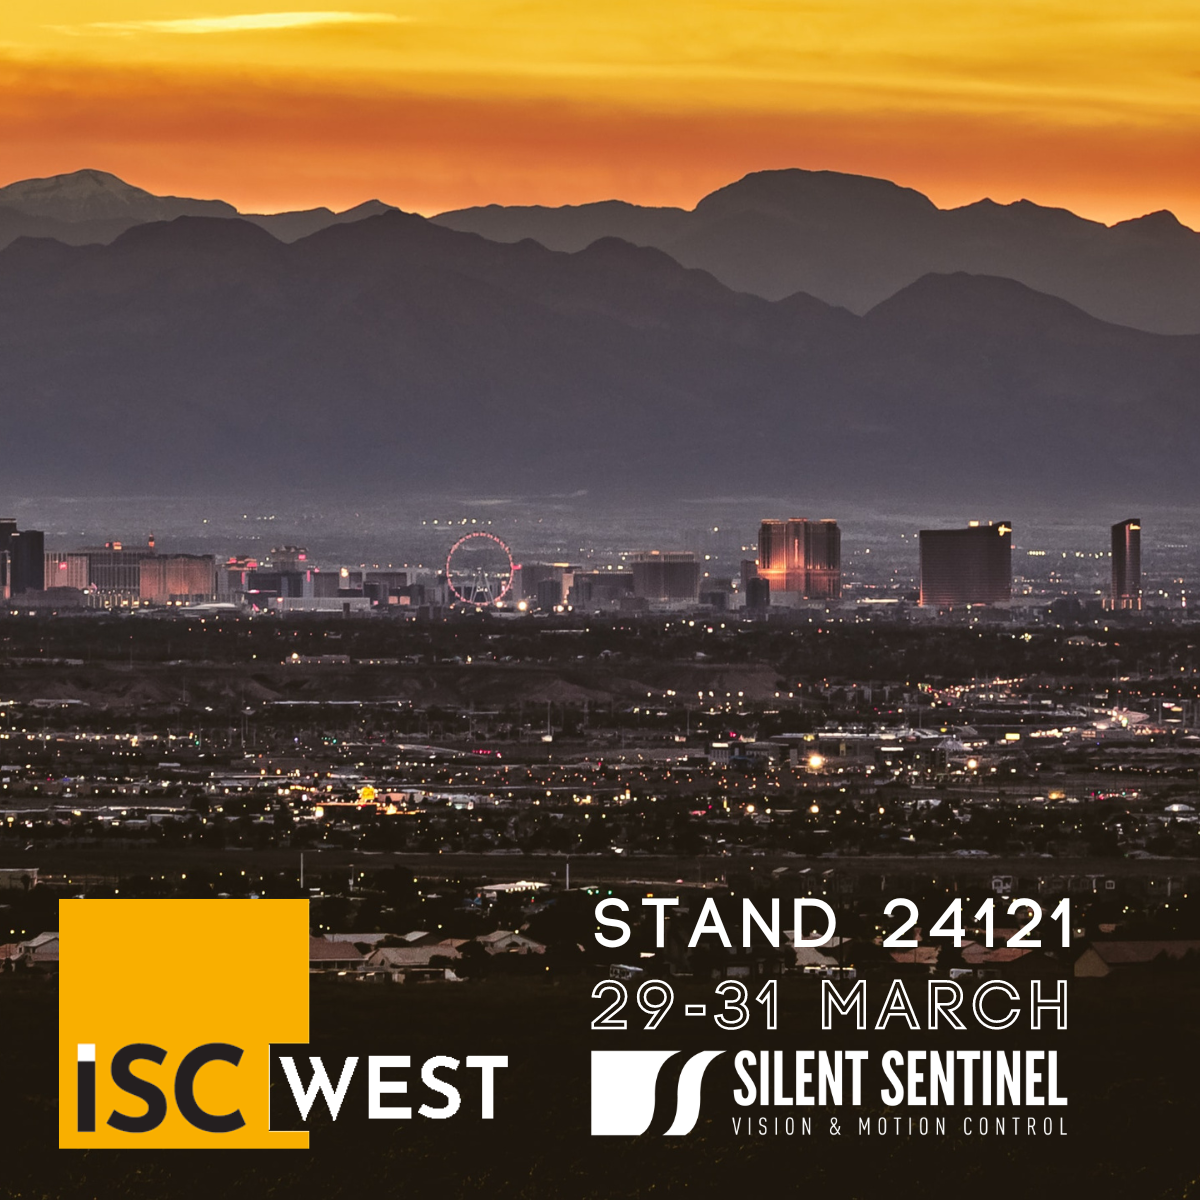 ISC West - Stand 24121 - 29-31 March 2023